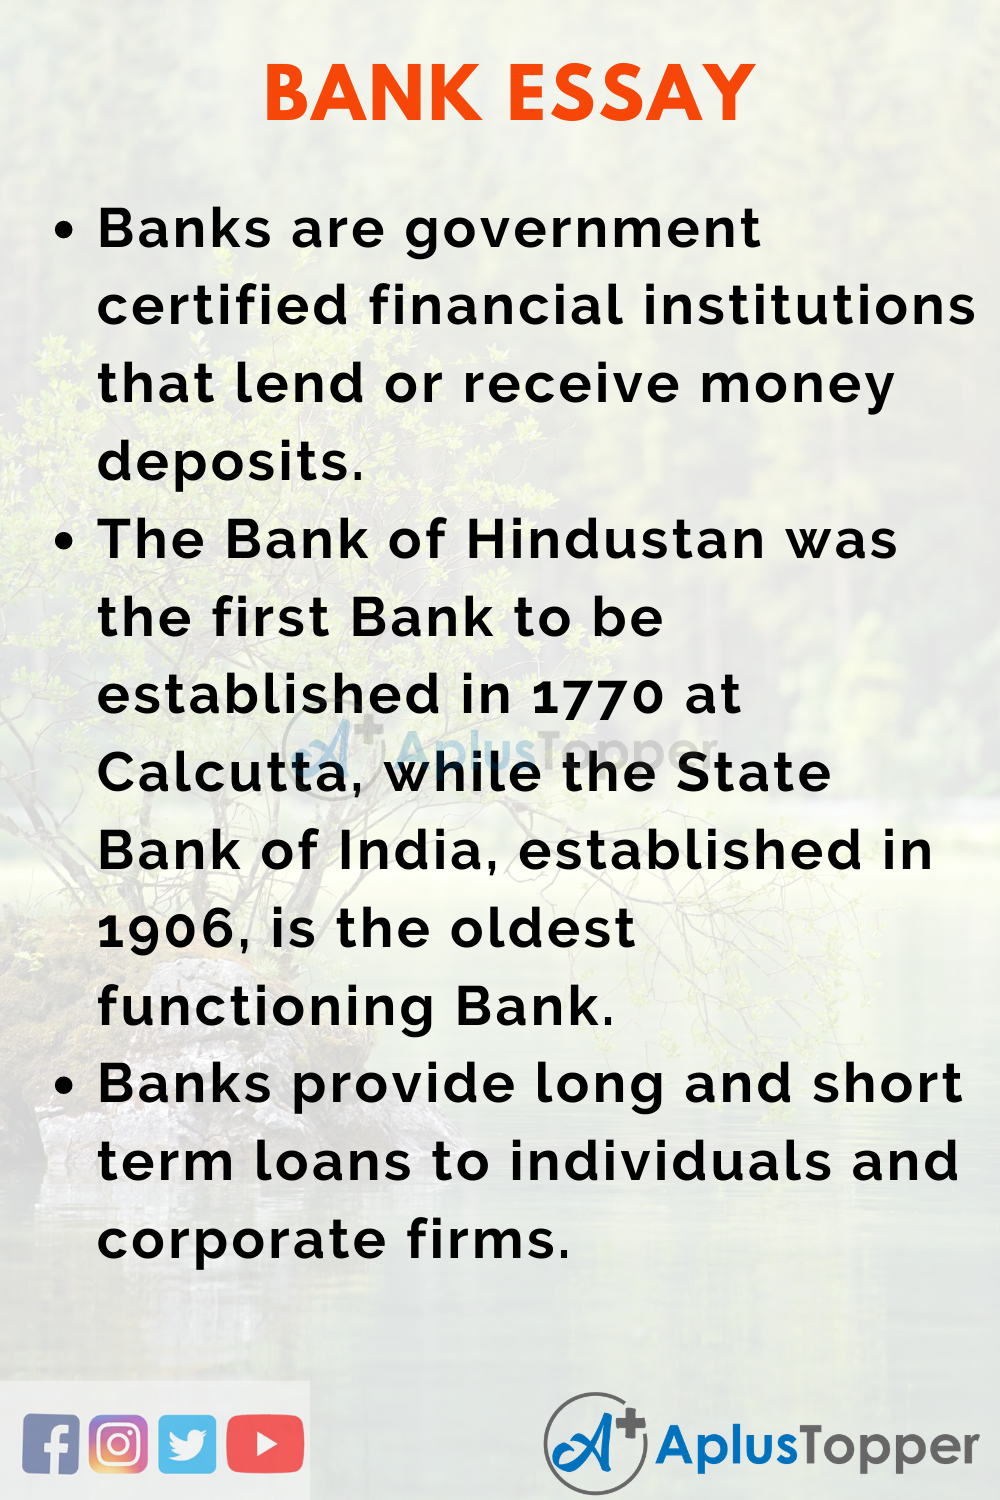 essay on banking related topics